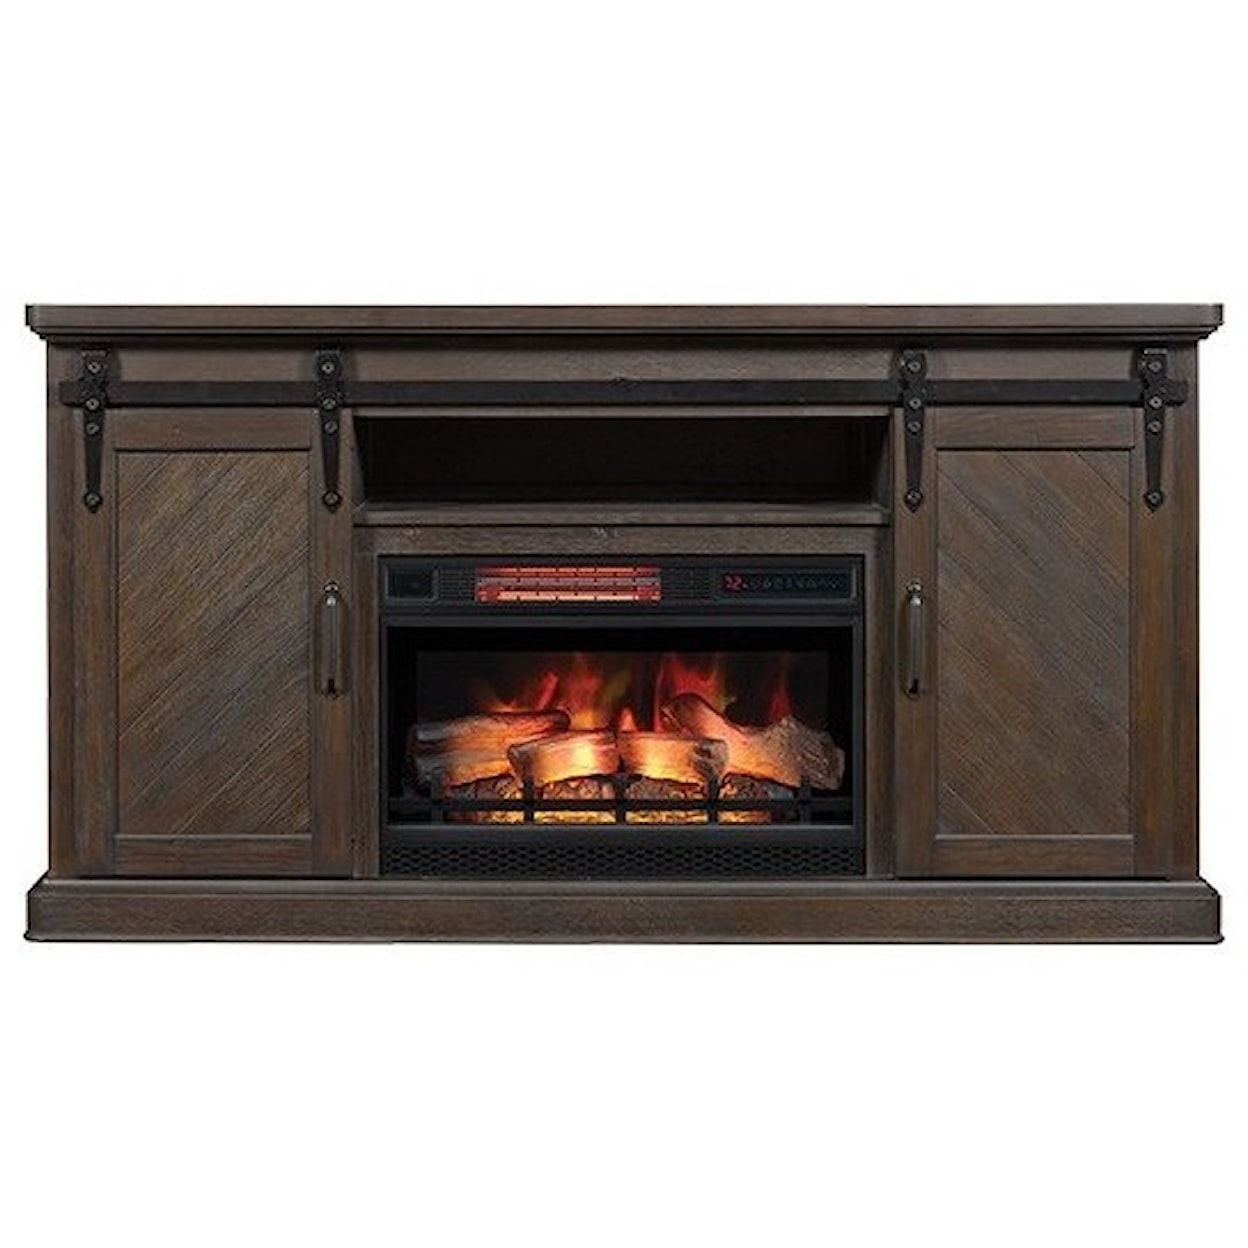 ClassicFlame Southgate Barn Door Media Mantel Fireplace